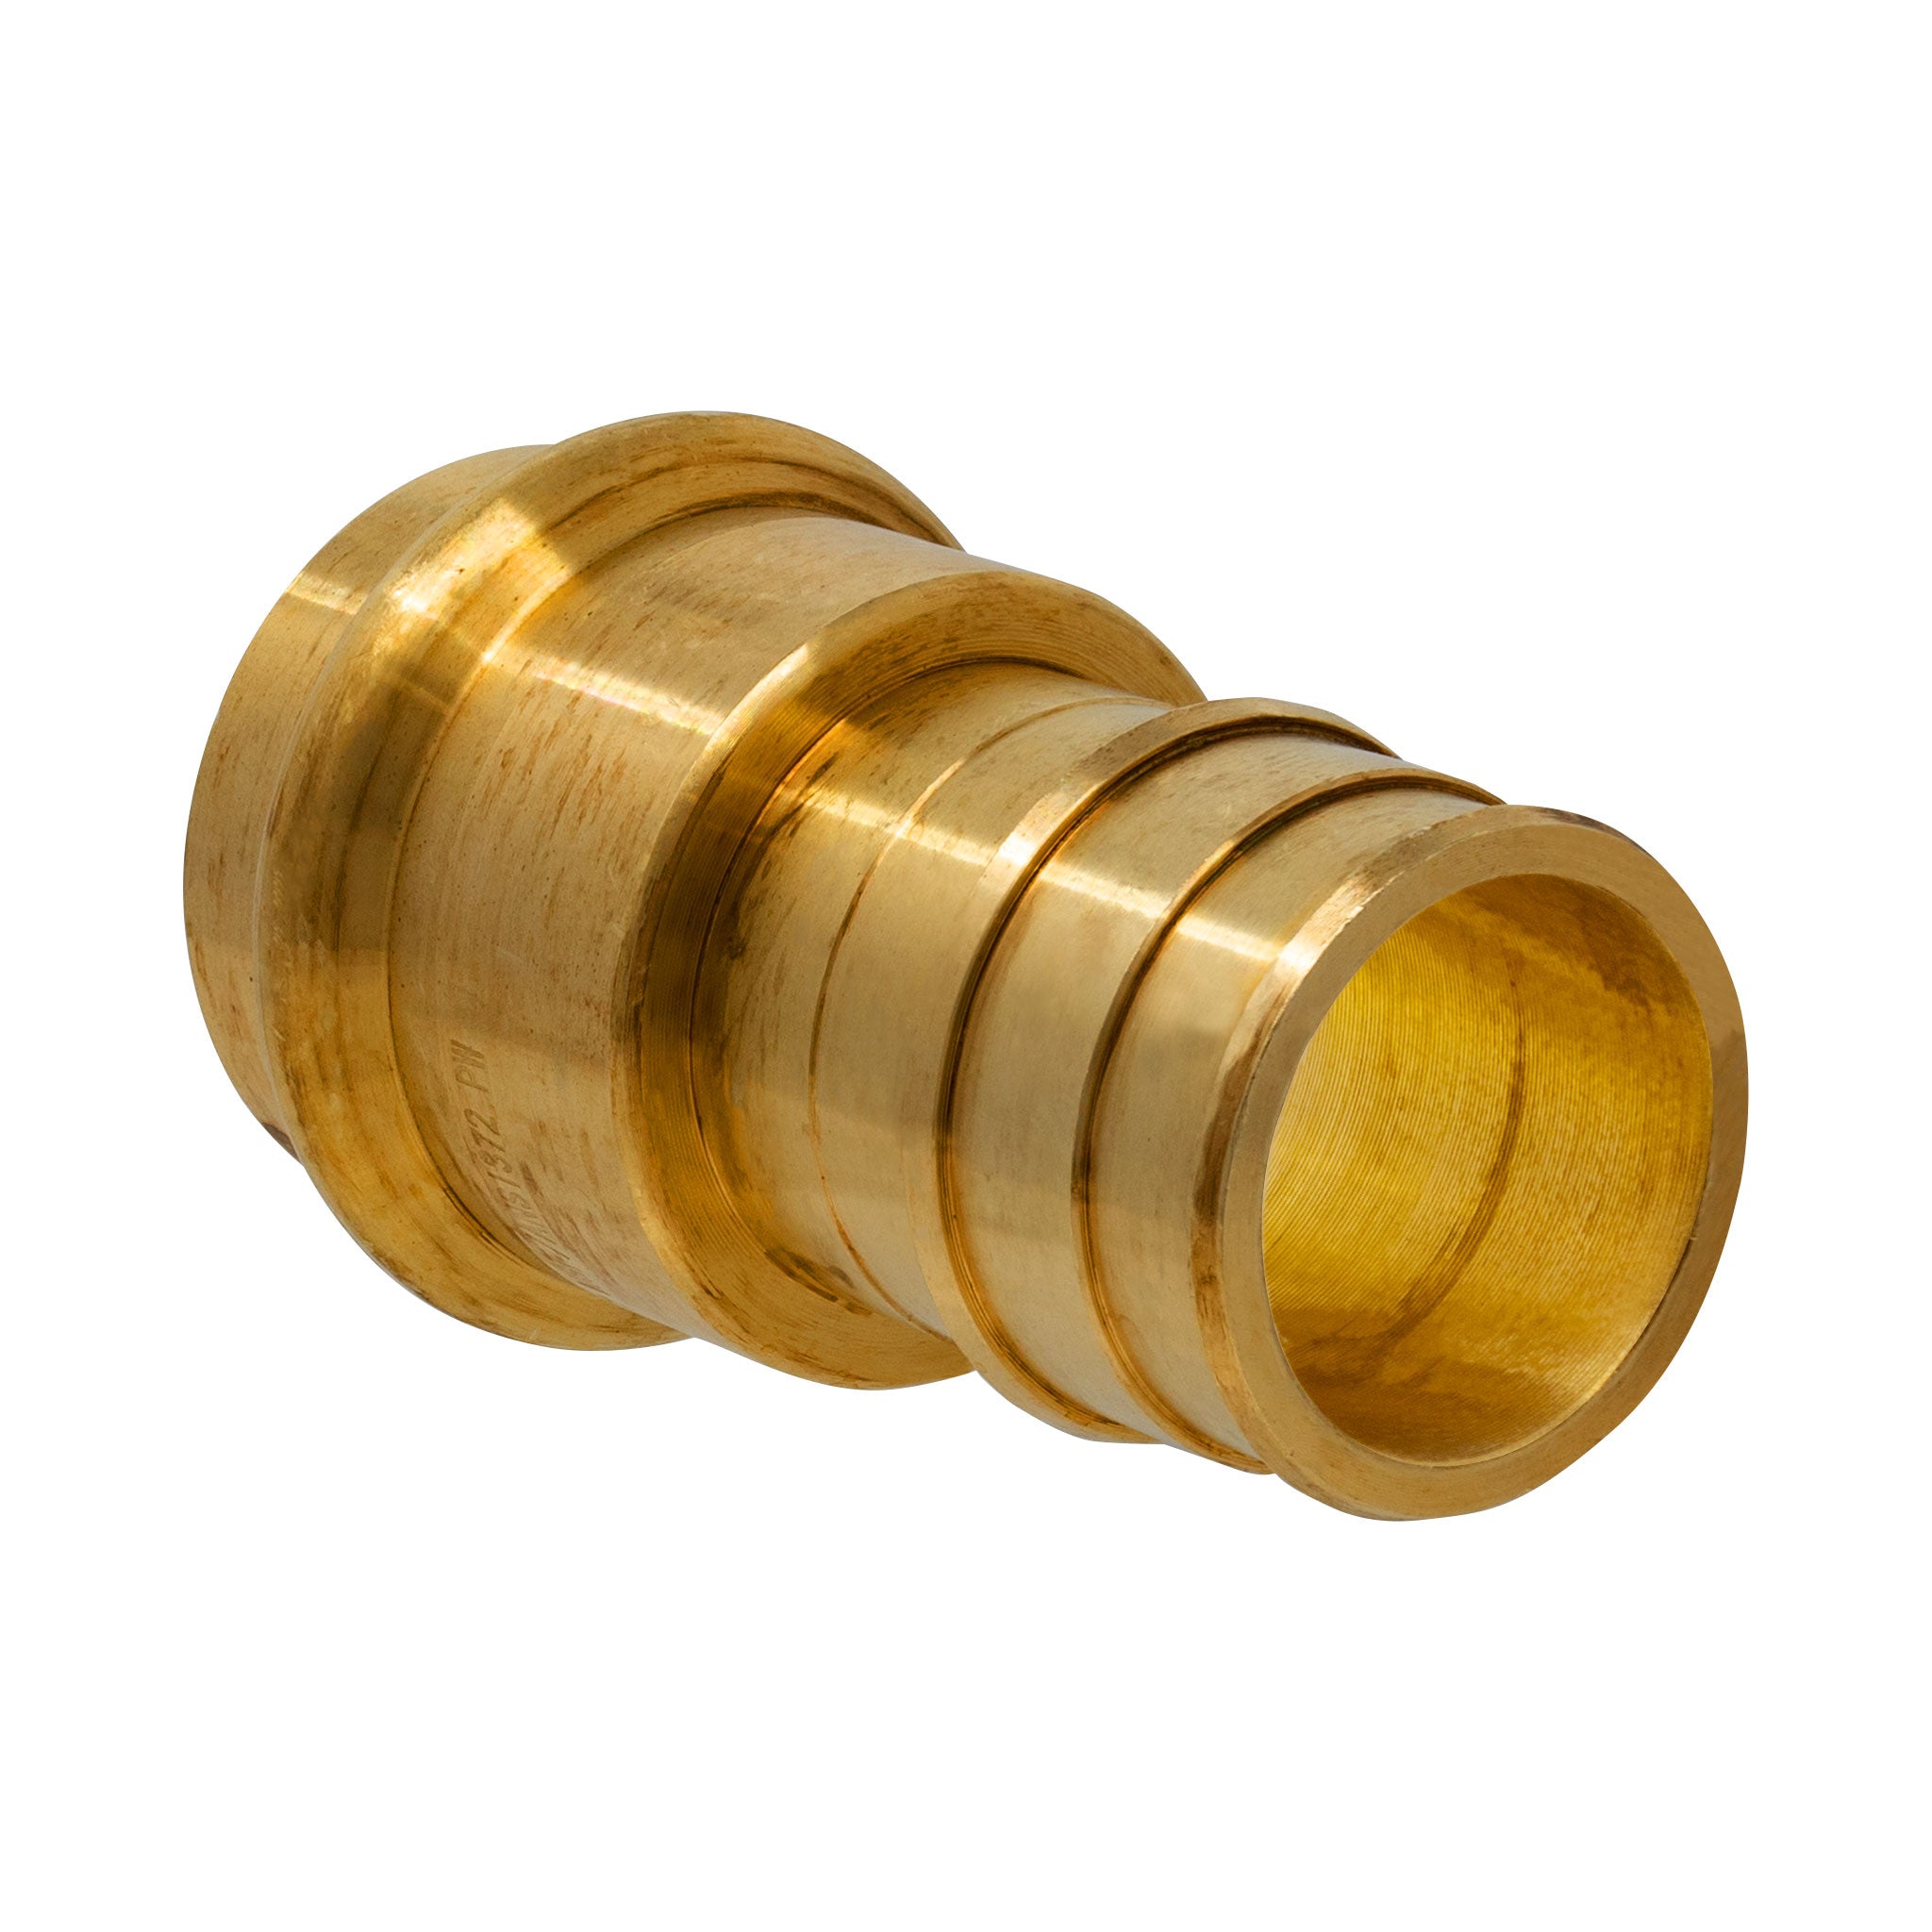 1/2" P x 1/2" PEX A (Expansion) Lead Free Brass Press Fitting Adapter F1960, ProPress Compatible